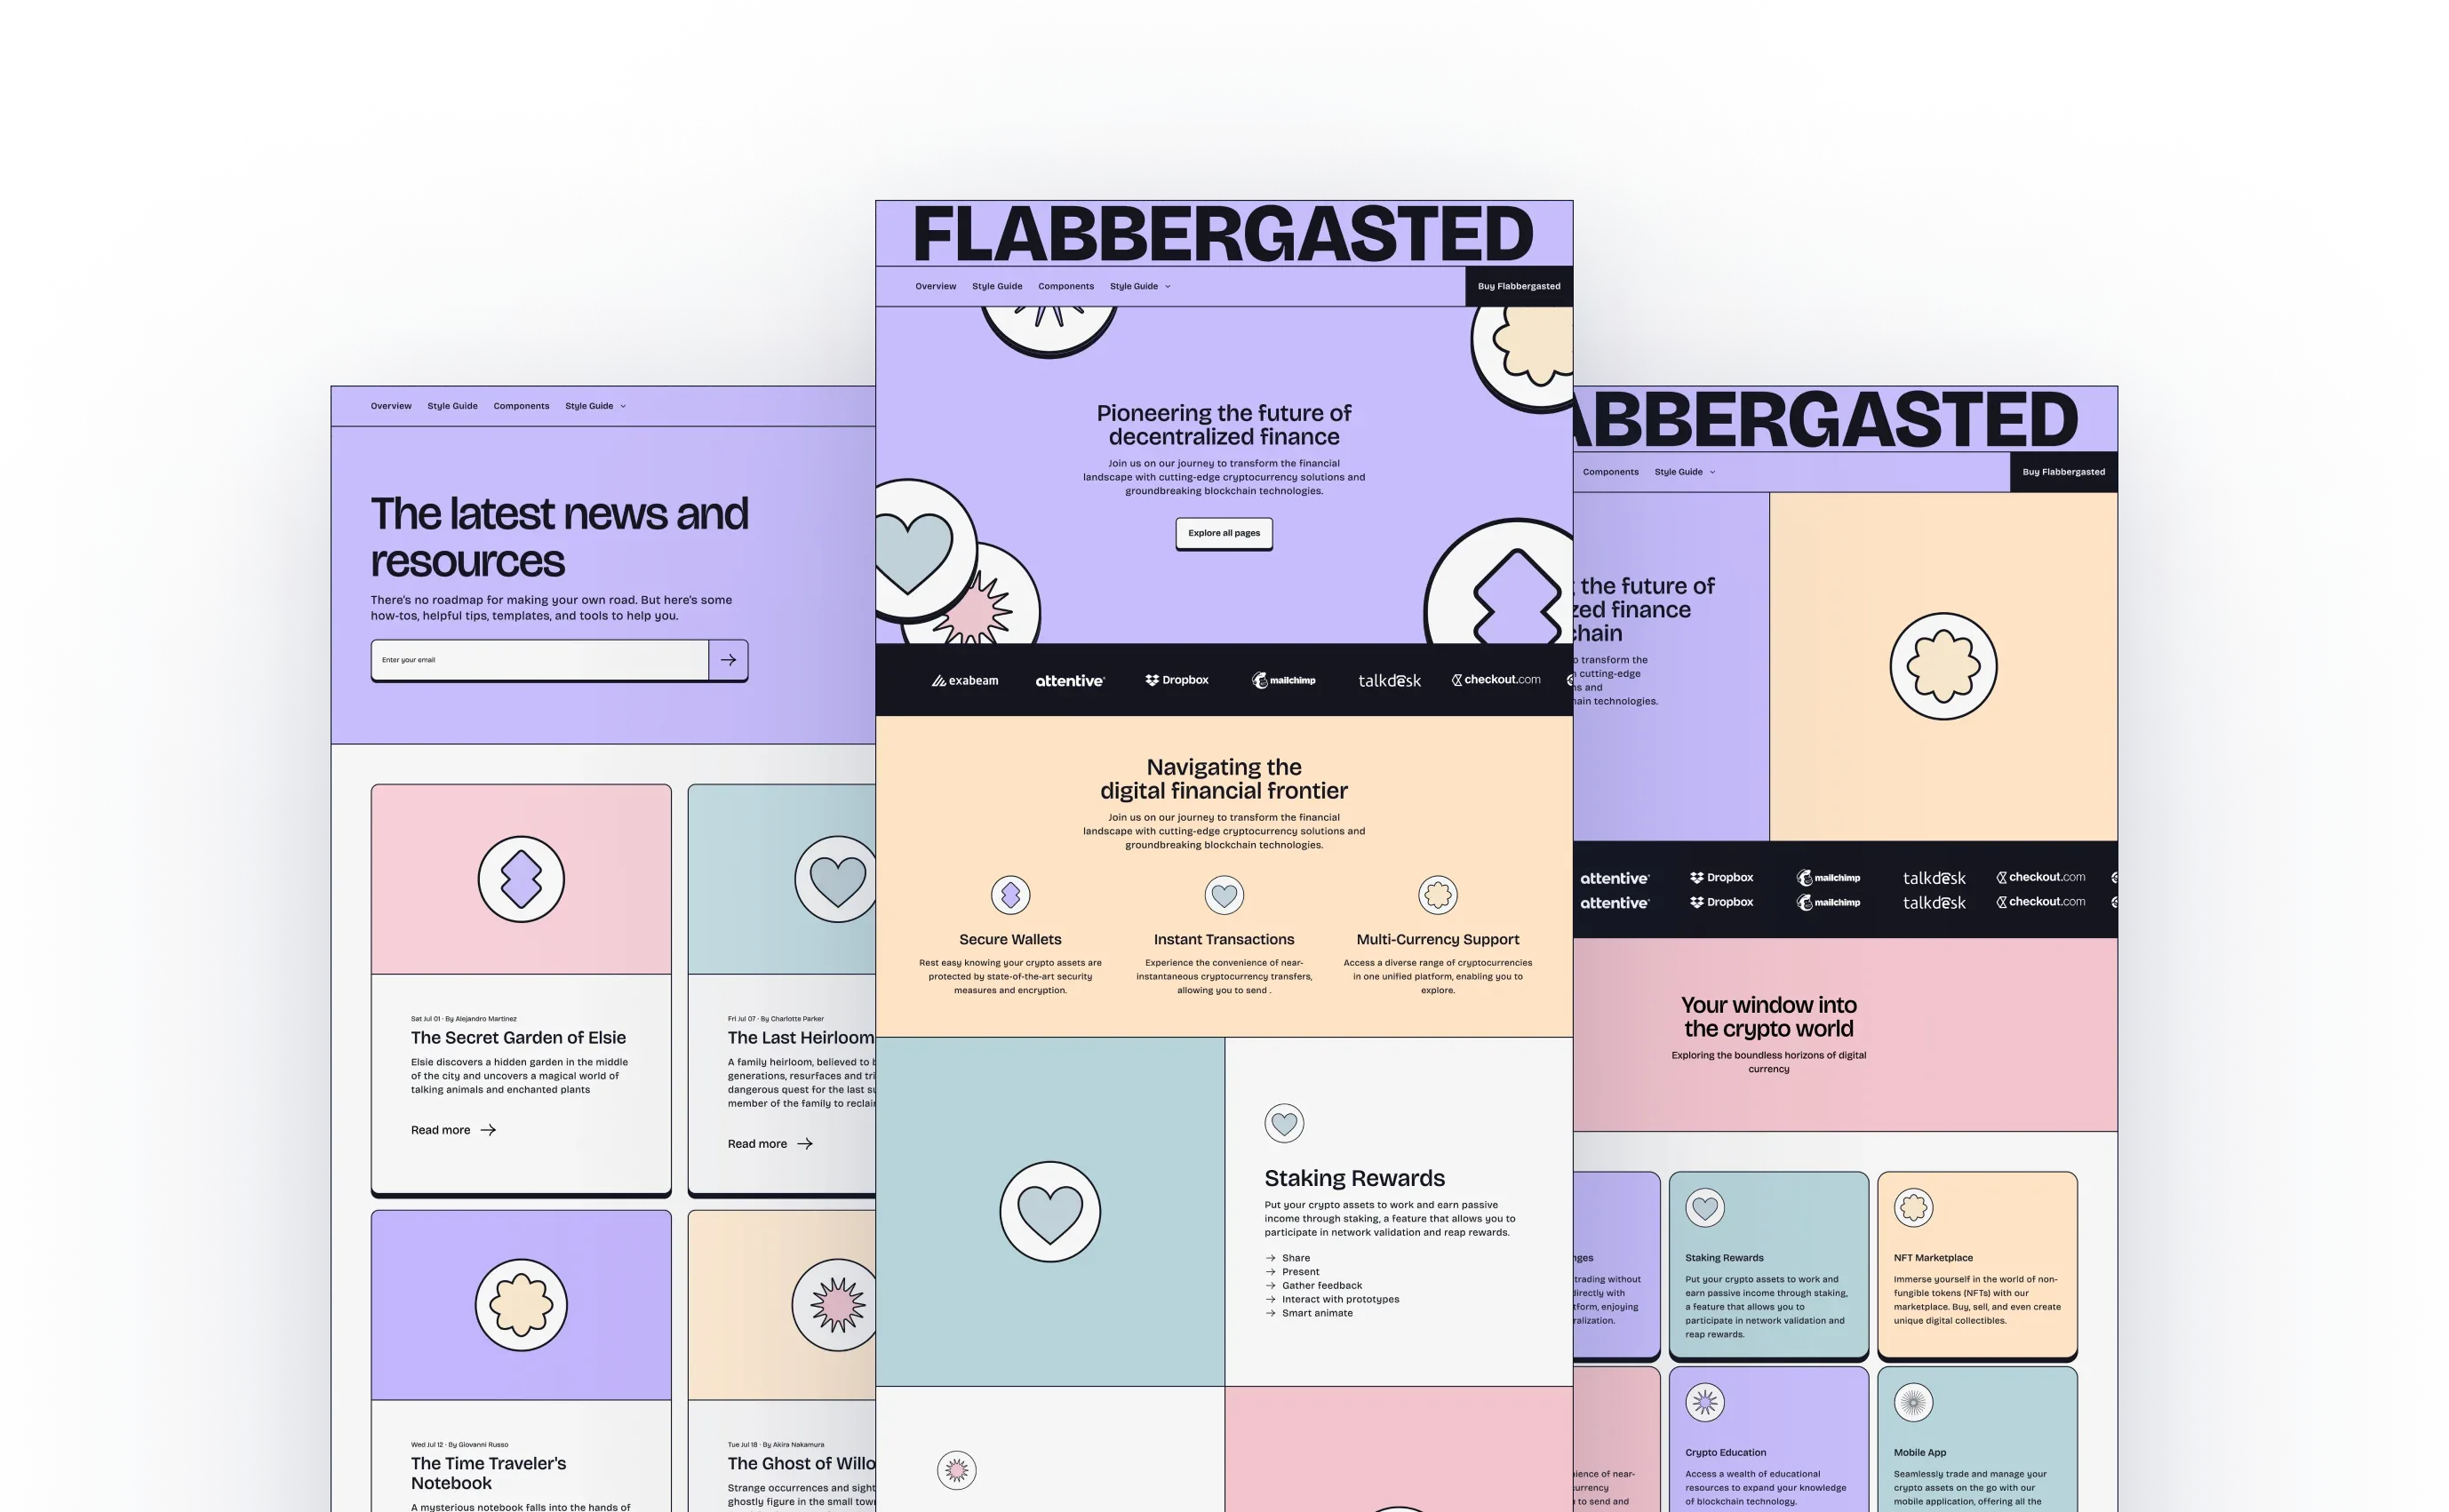 Flabbergasted theme preview with a colorful, modular design layout for a cryptocurrency platform. It features sections for the latest news, resources, secure wallets, instant transactions, multi-currency support, staking rewards, and an NFT marketplace.